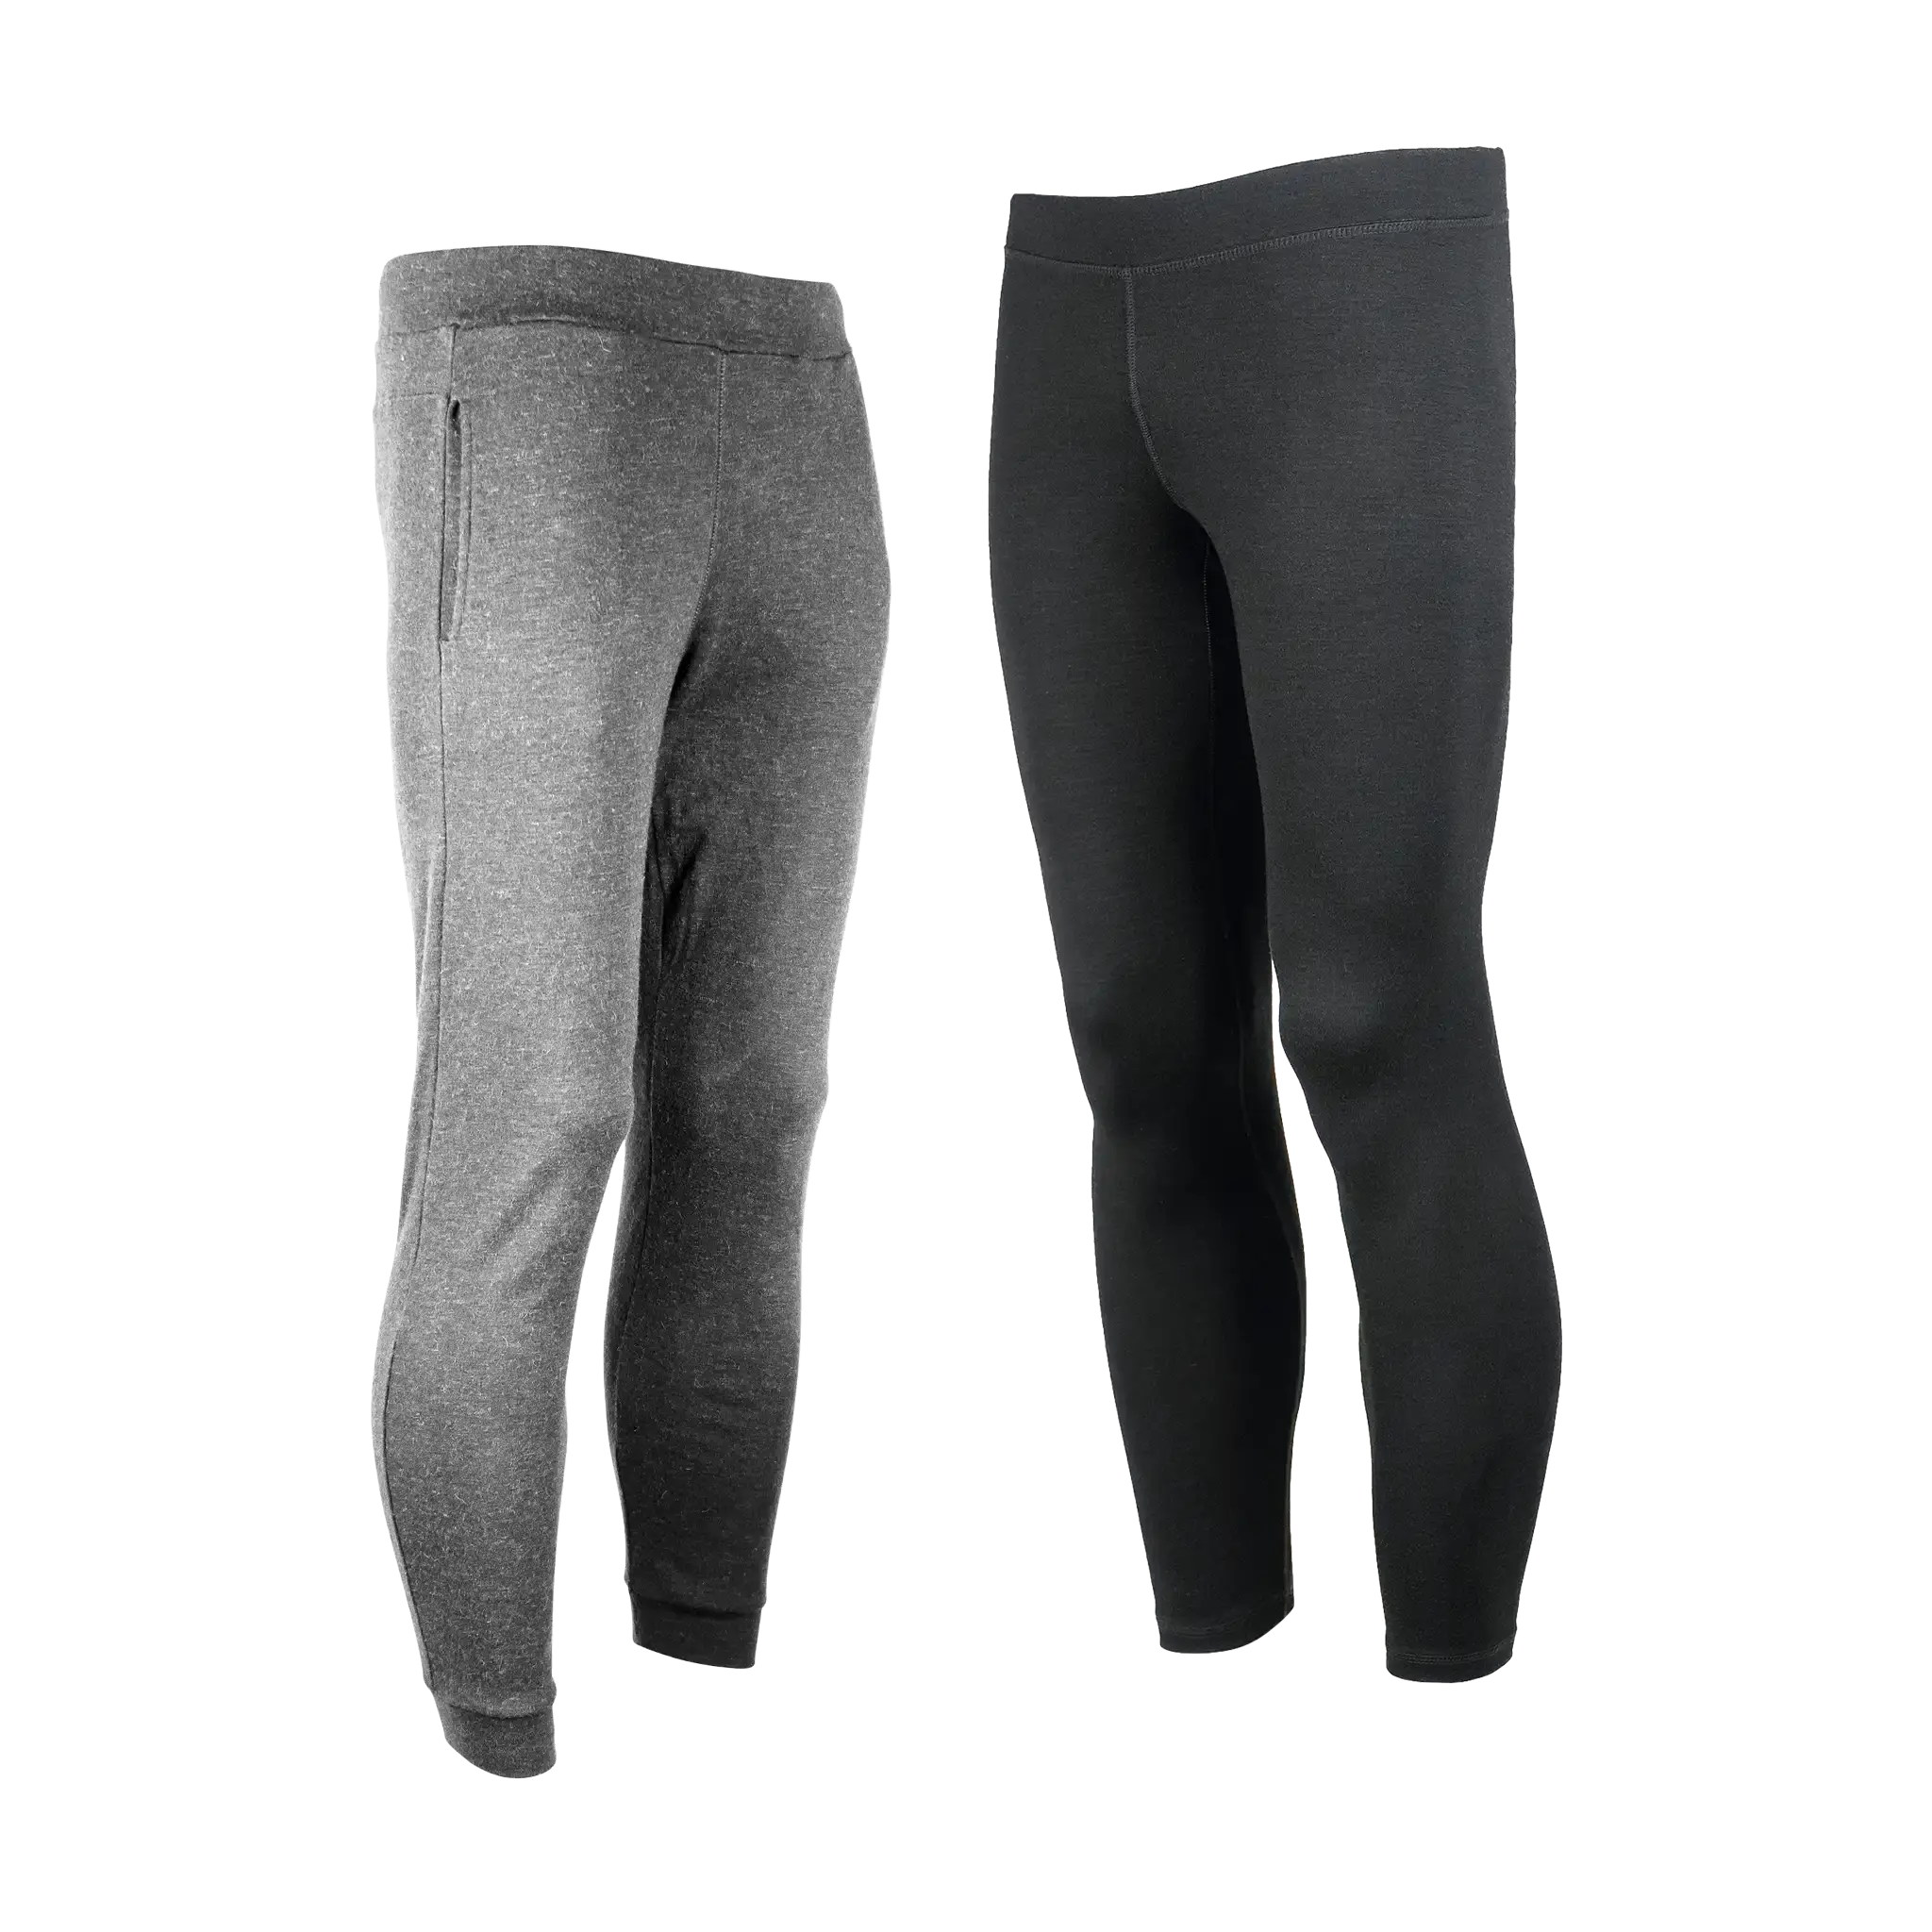  5 Pack Mens Thermal Compression Pants Fleece Lined